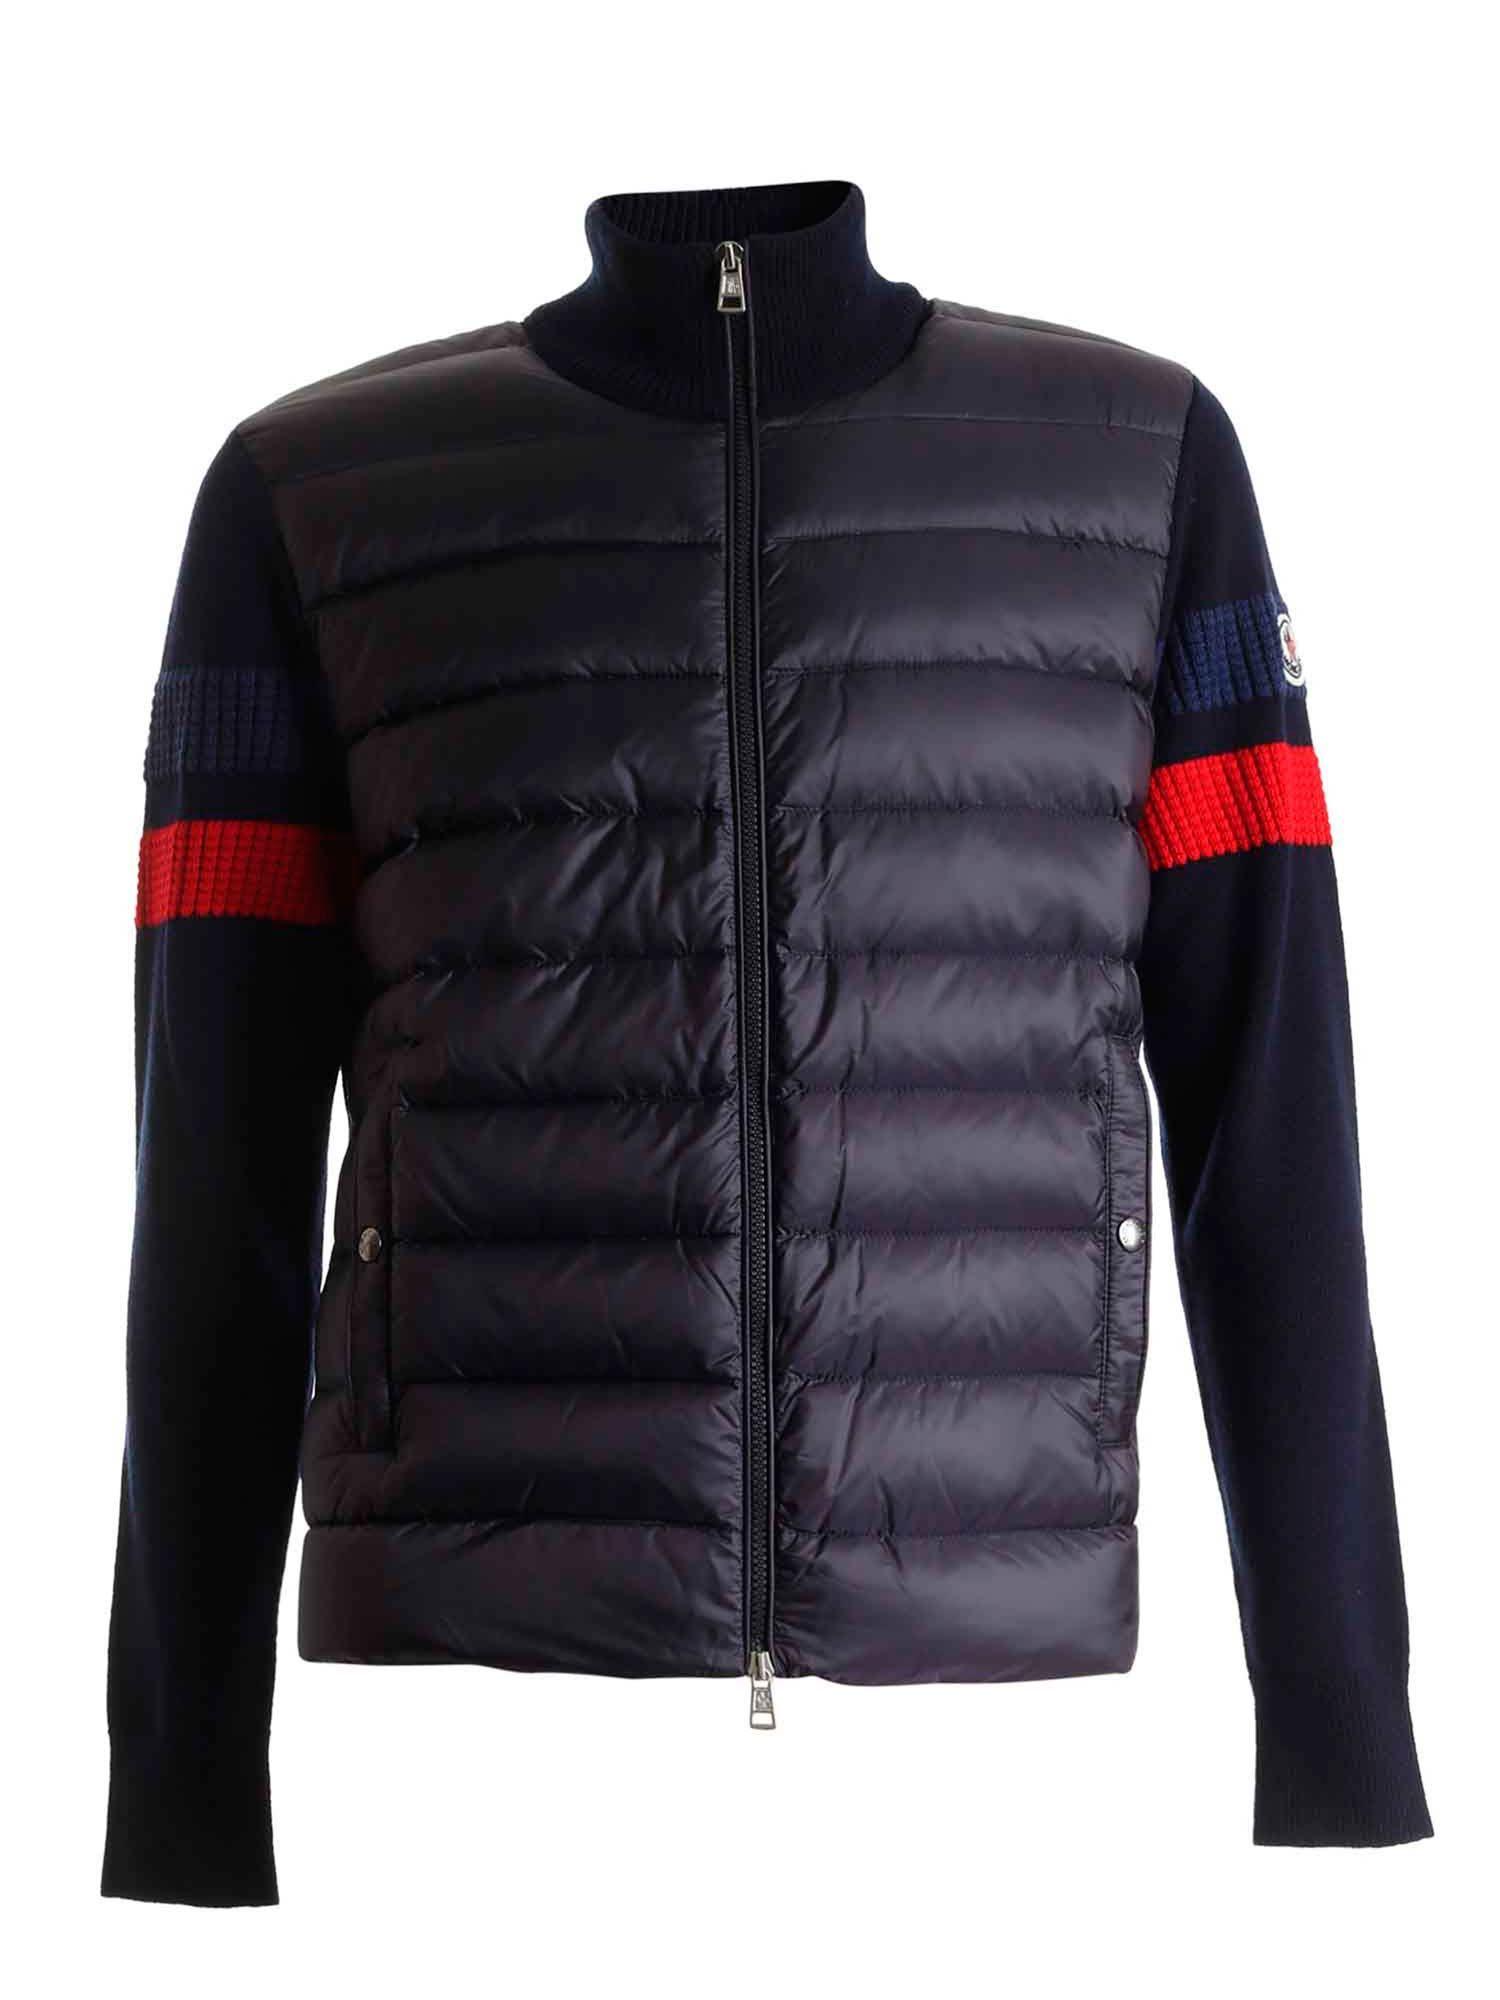 Moncler Padded Cardigan in Blue for Men - Lyst